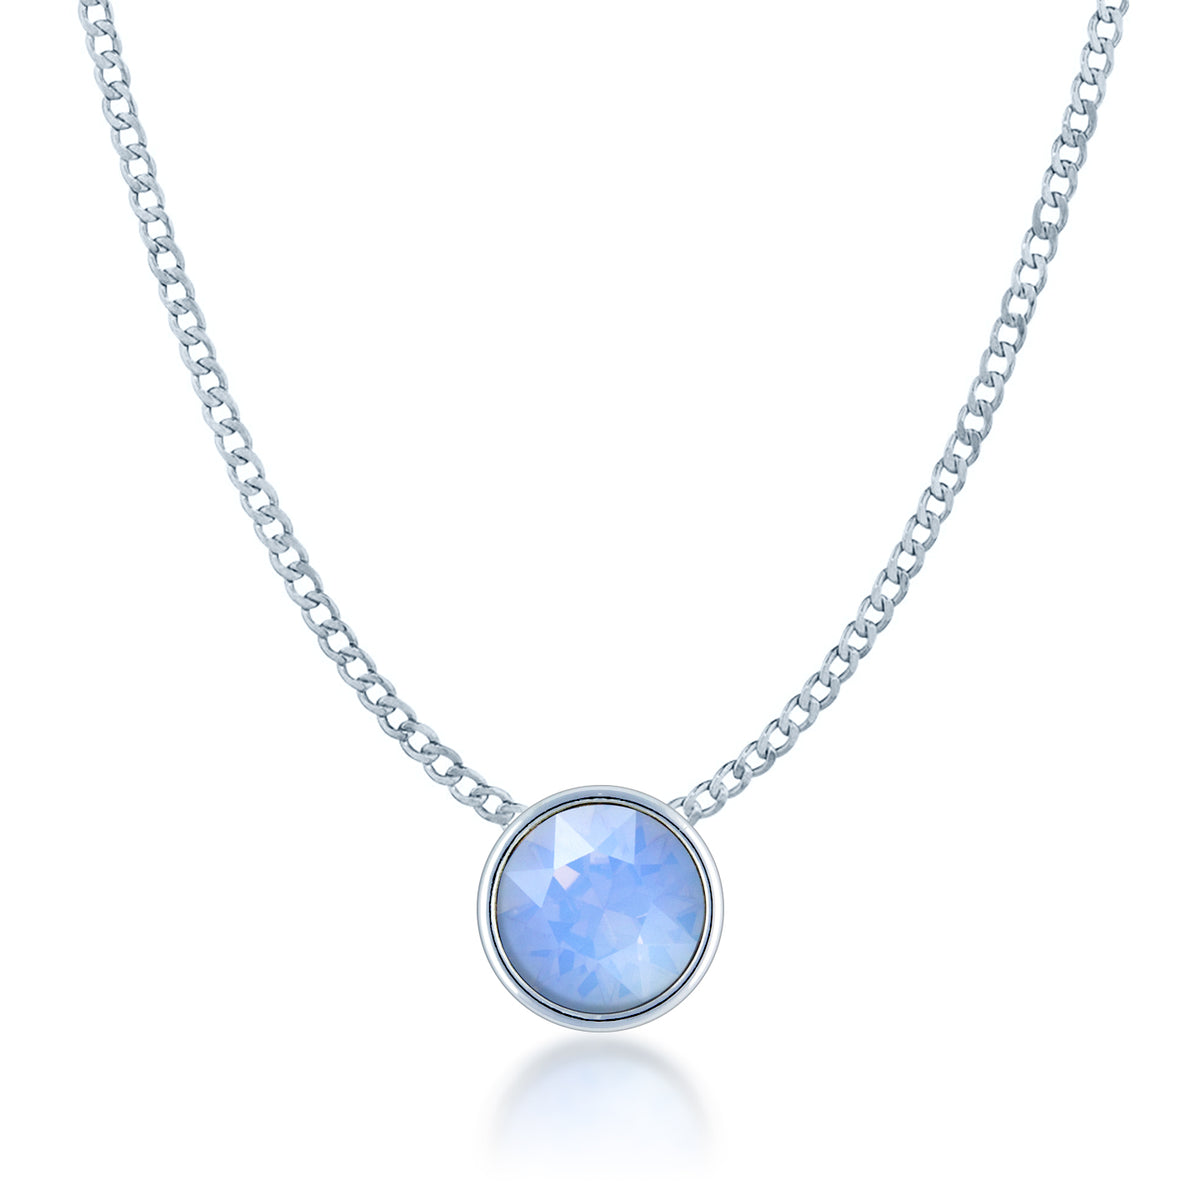 Harley Small Pendant Necklace with Air Blue Round Opals from Swarovski Silver Toned Rhodium Plated - Ed Heart